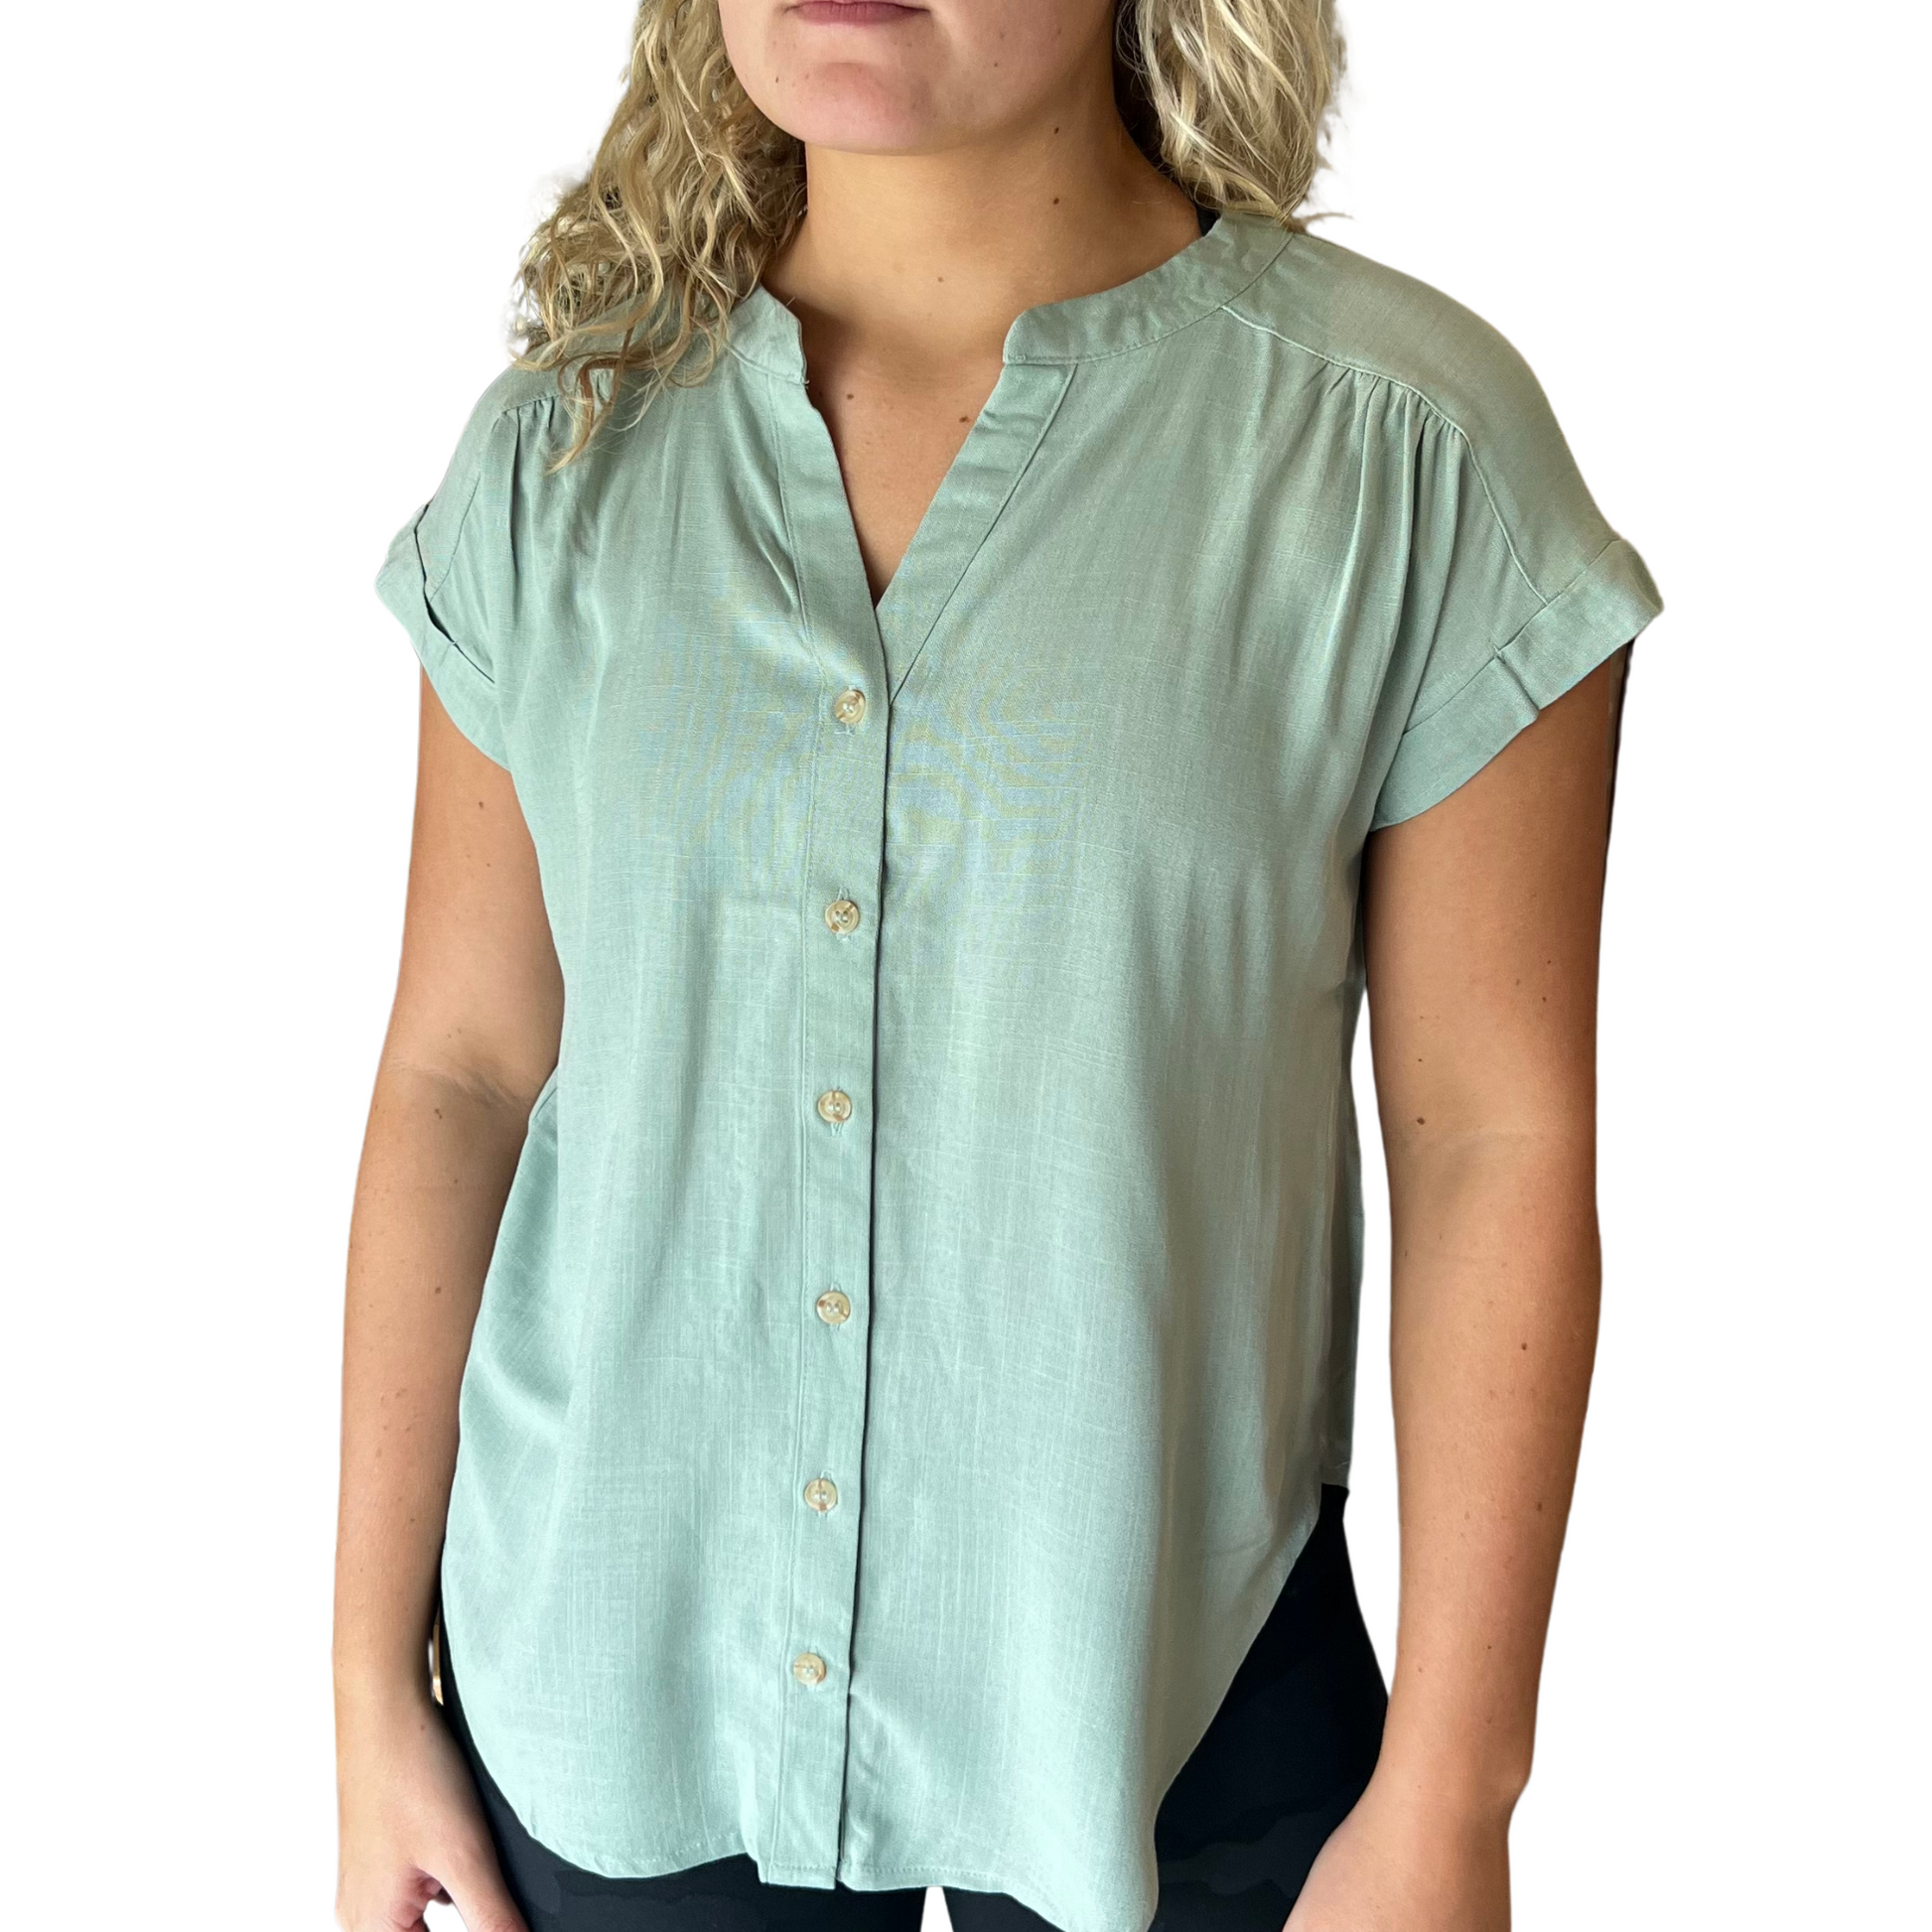 Rolled Sleeve woven top in sage